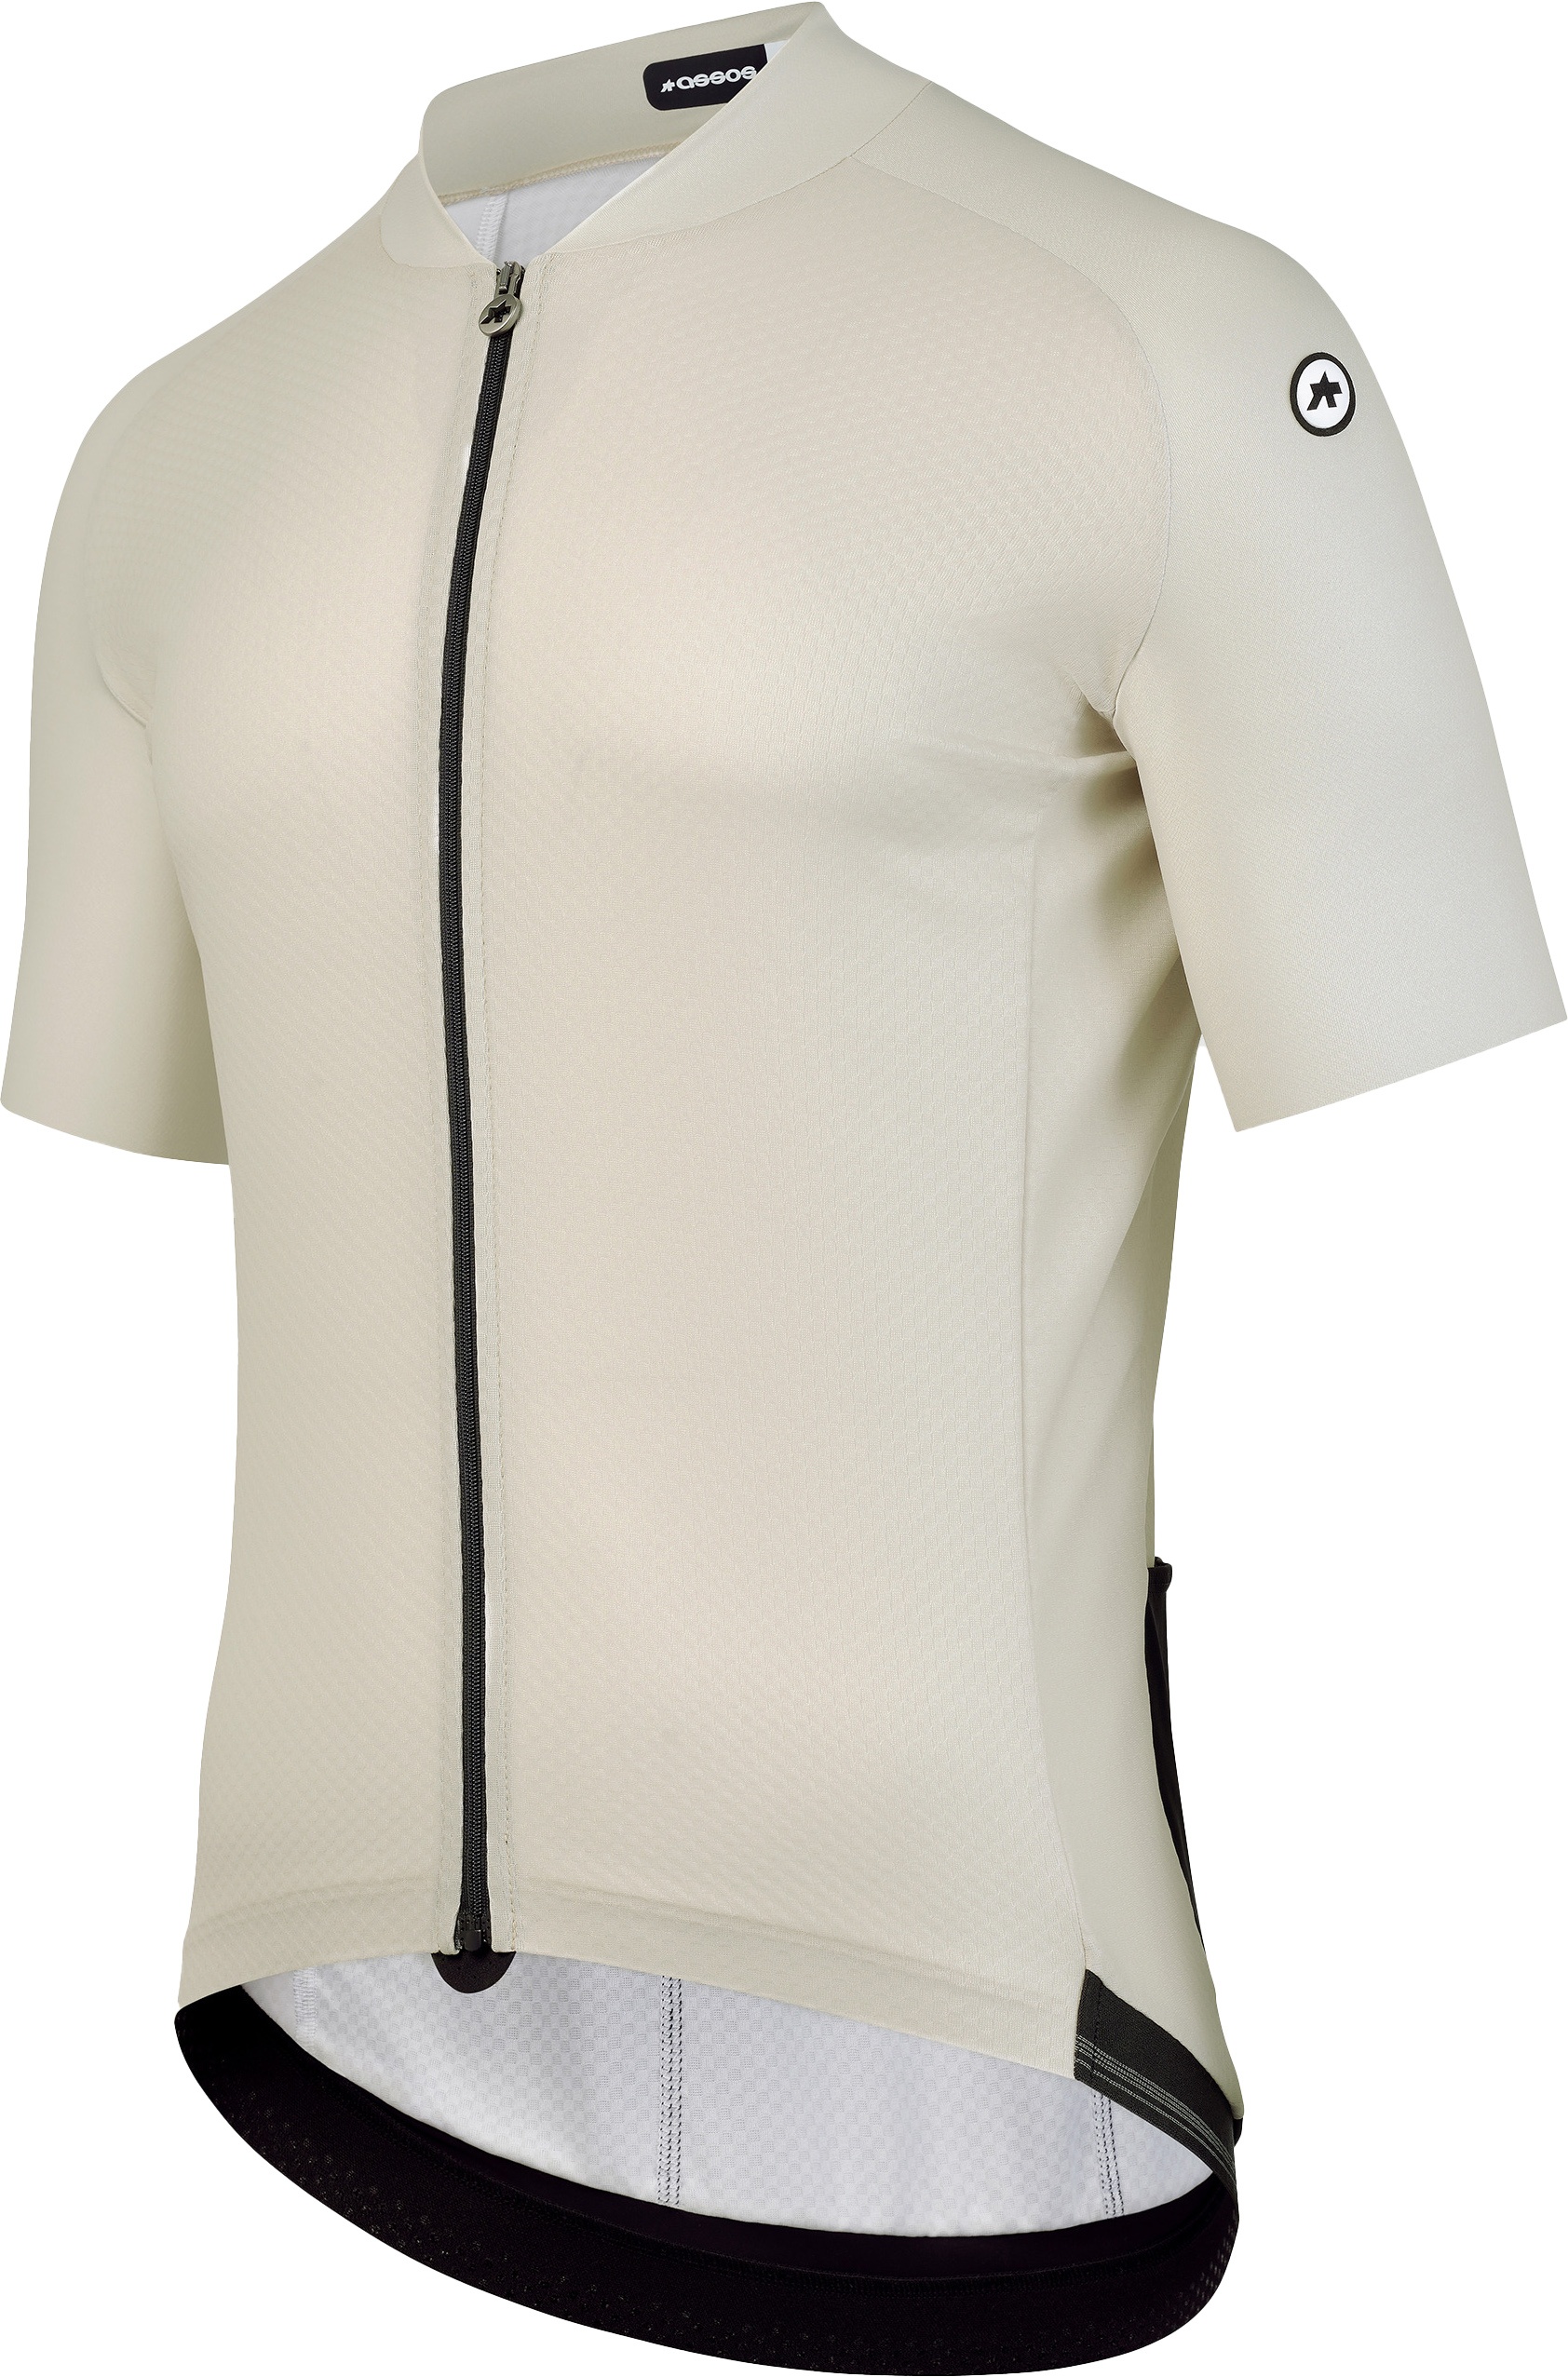 Assos MILLE GT Jersey C2 EVO - Moon Sand Limited